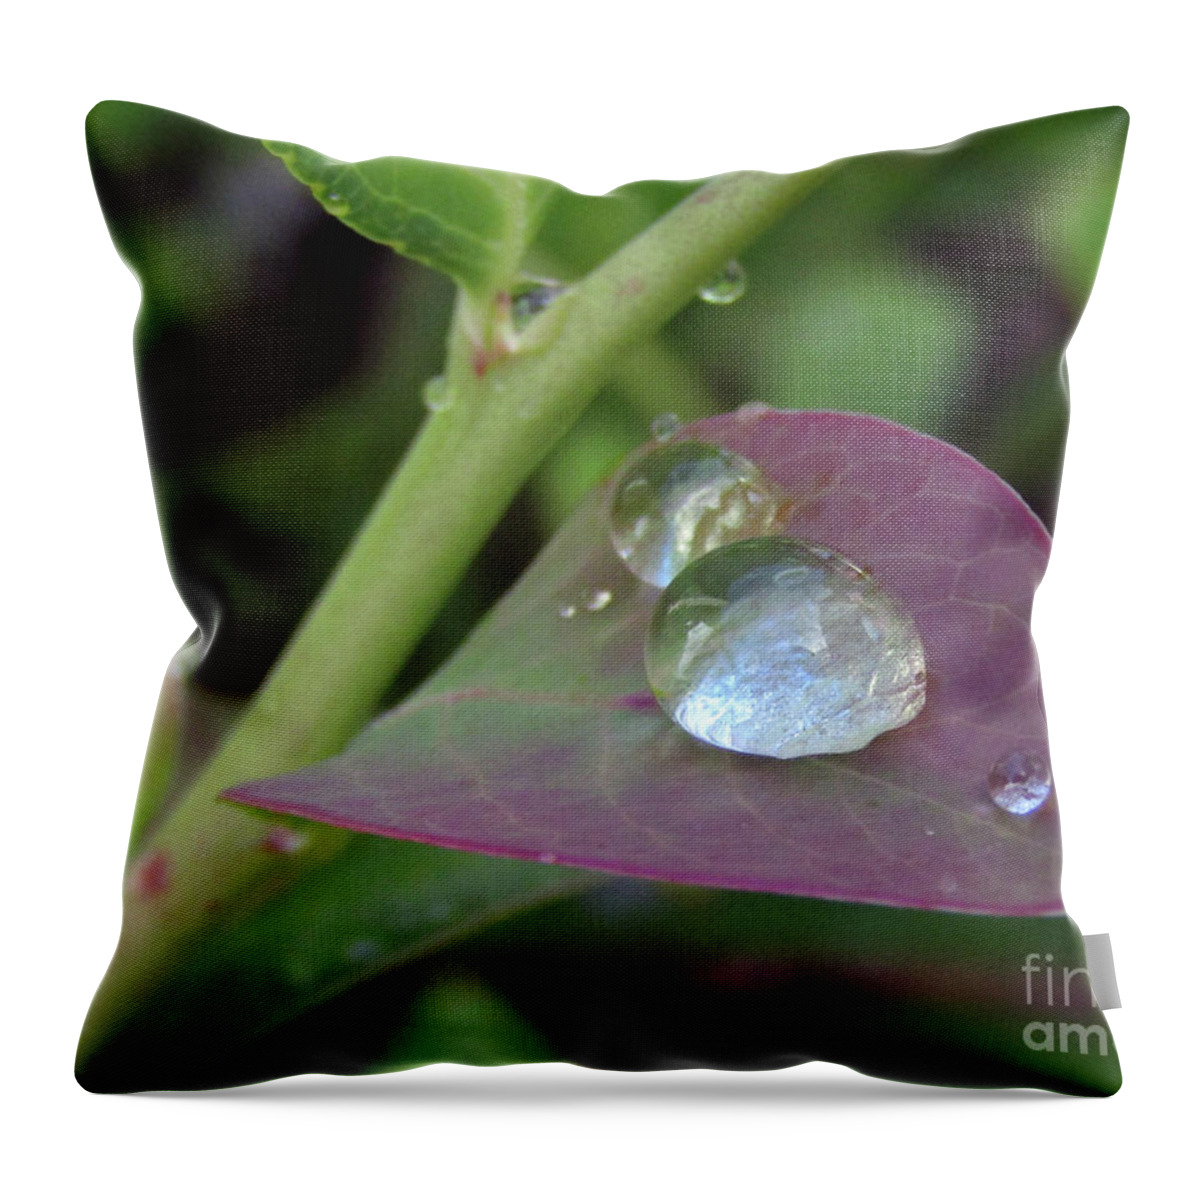 Raindrops Throw Pillow featuring the photograph Pearls On Leaves 4 by Kim Tran